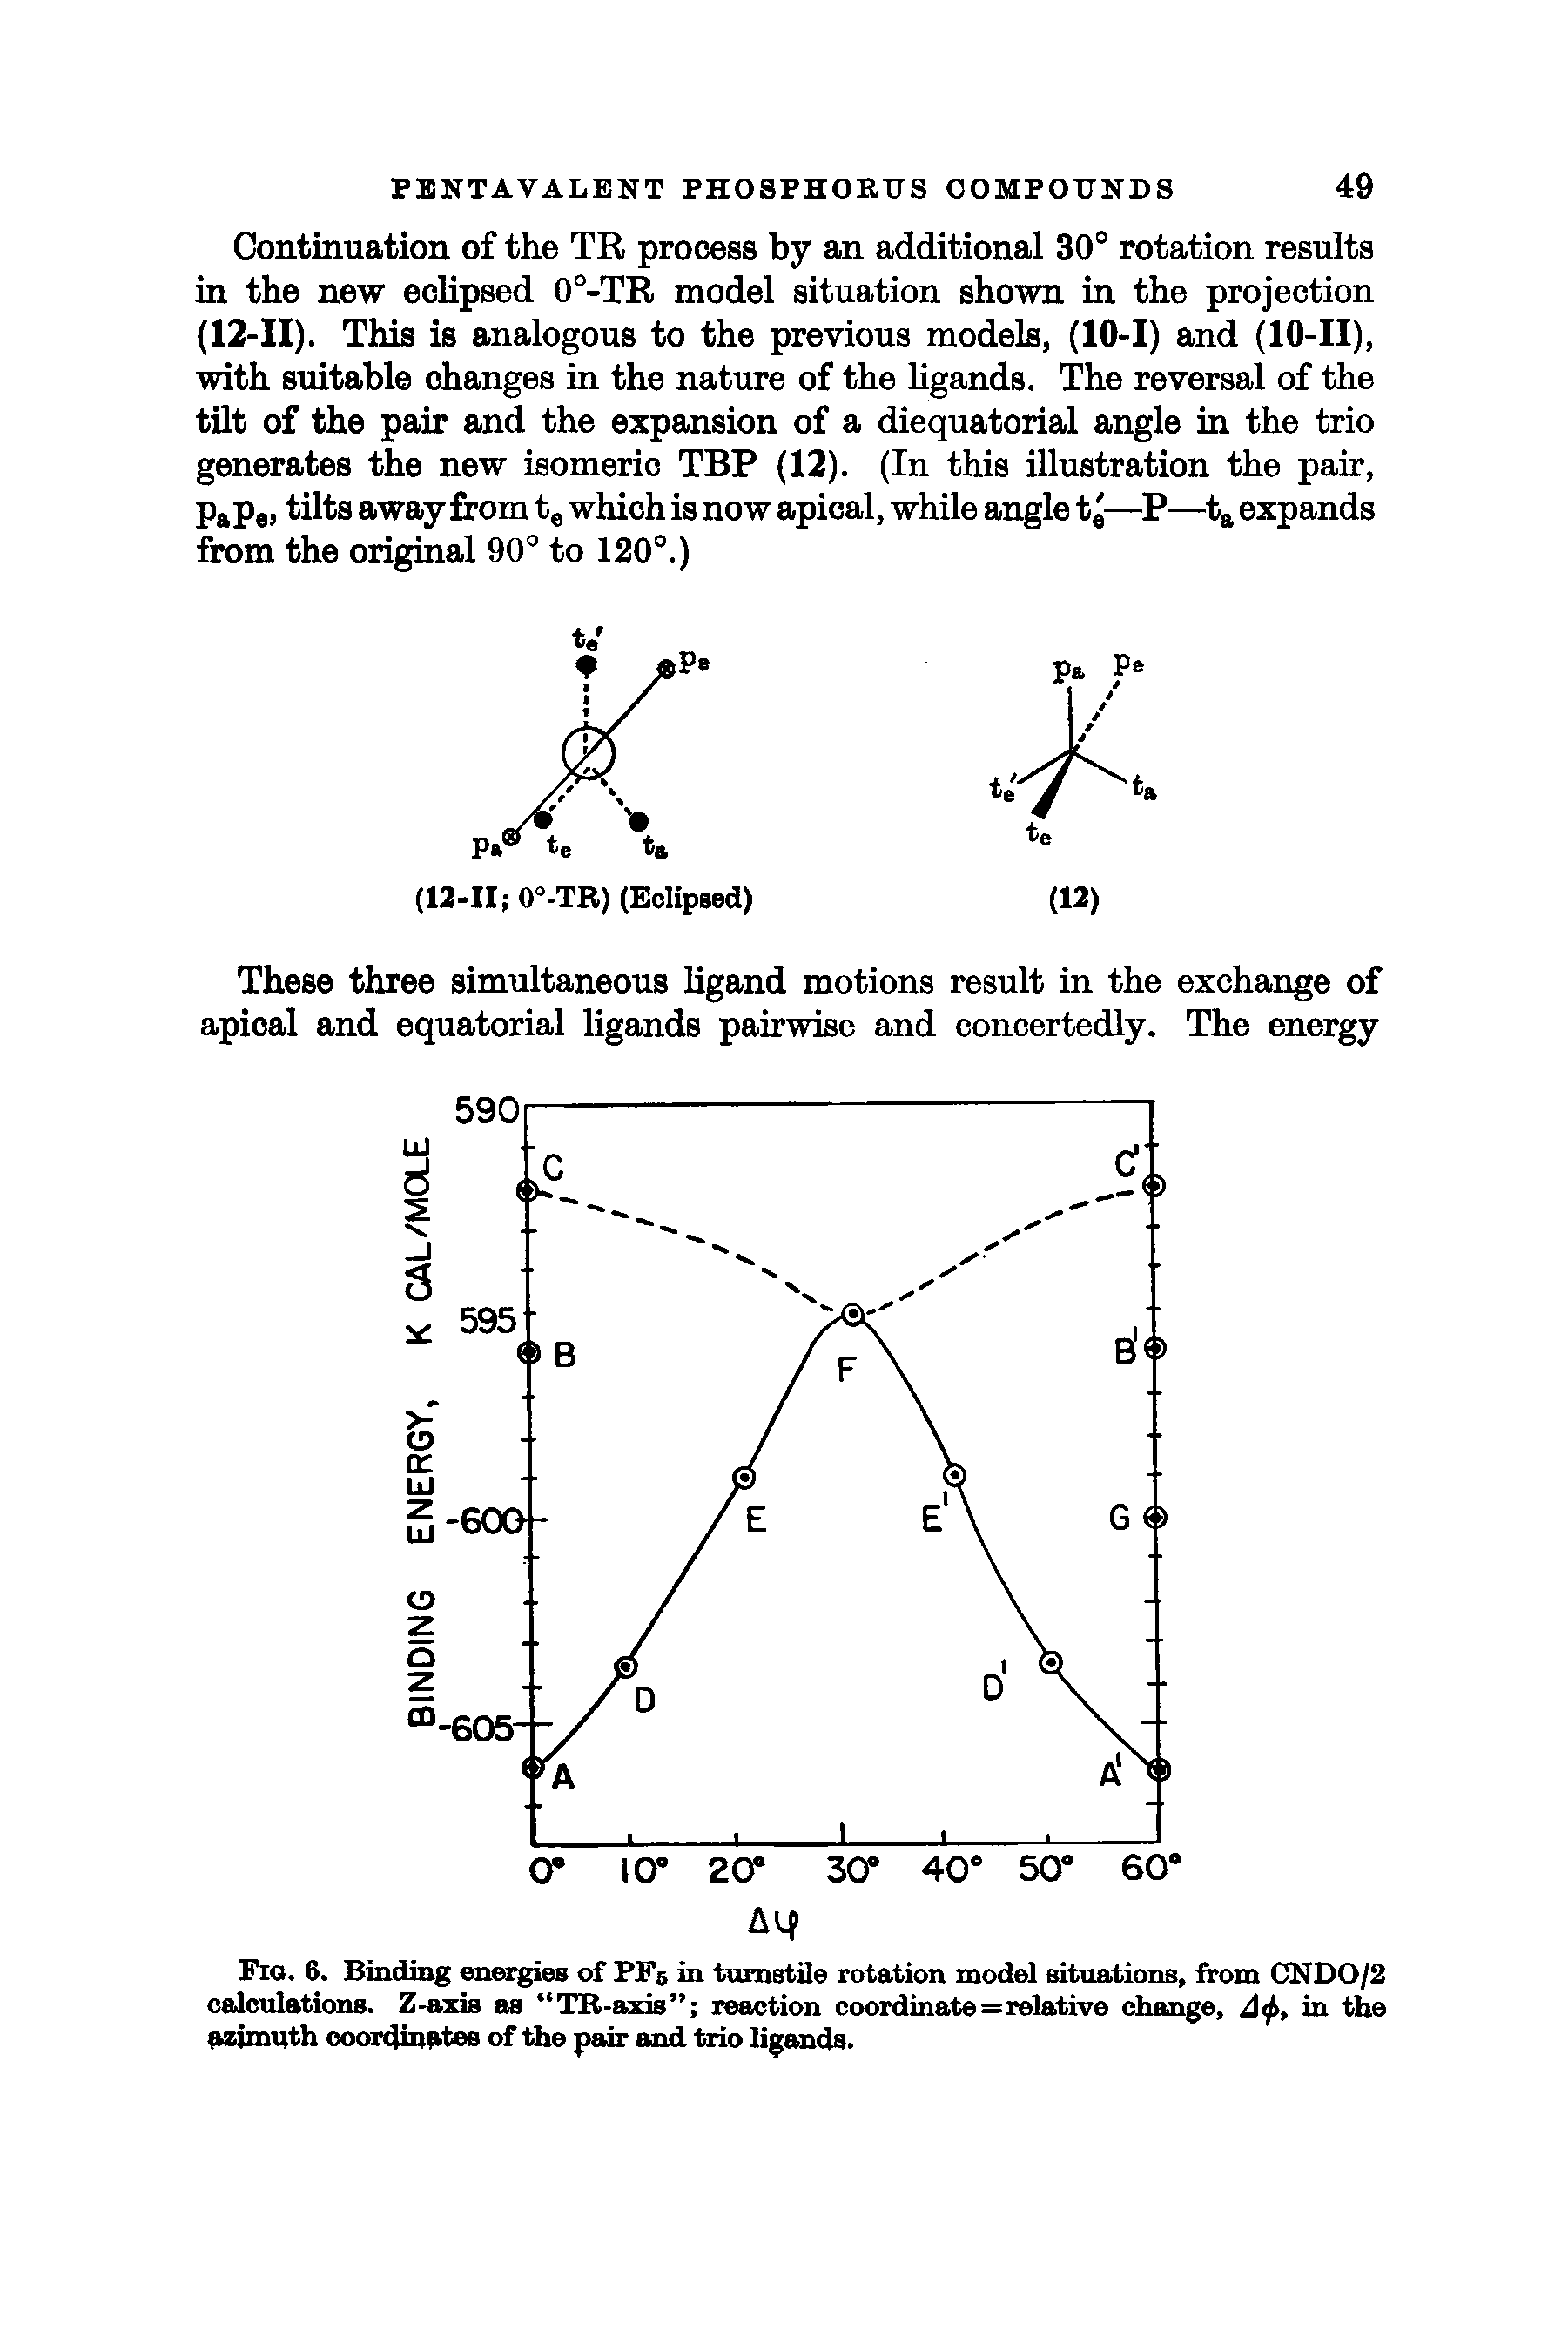 Fig. 6. Binding energies of PF in turnstile rotation model situations, from CNDO/2 calculations. Z-axis as TR-axis reaction coordinates relative change, A<f>, in the azimuth coordinates of the pair and trio ligands.